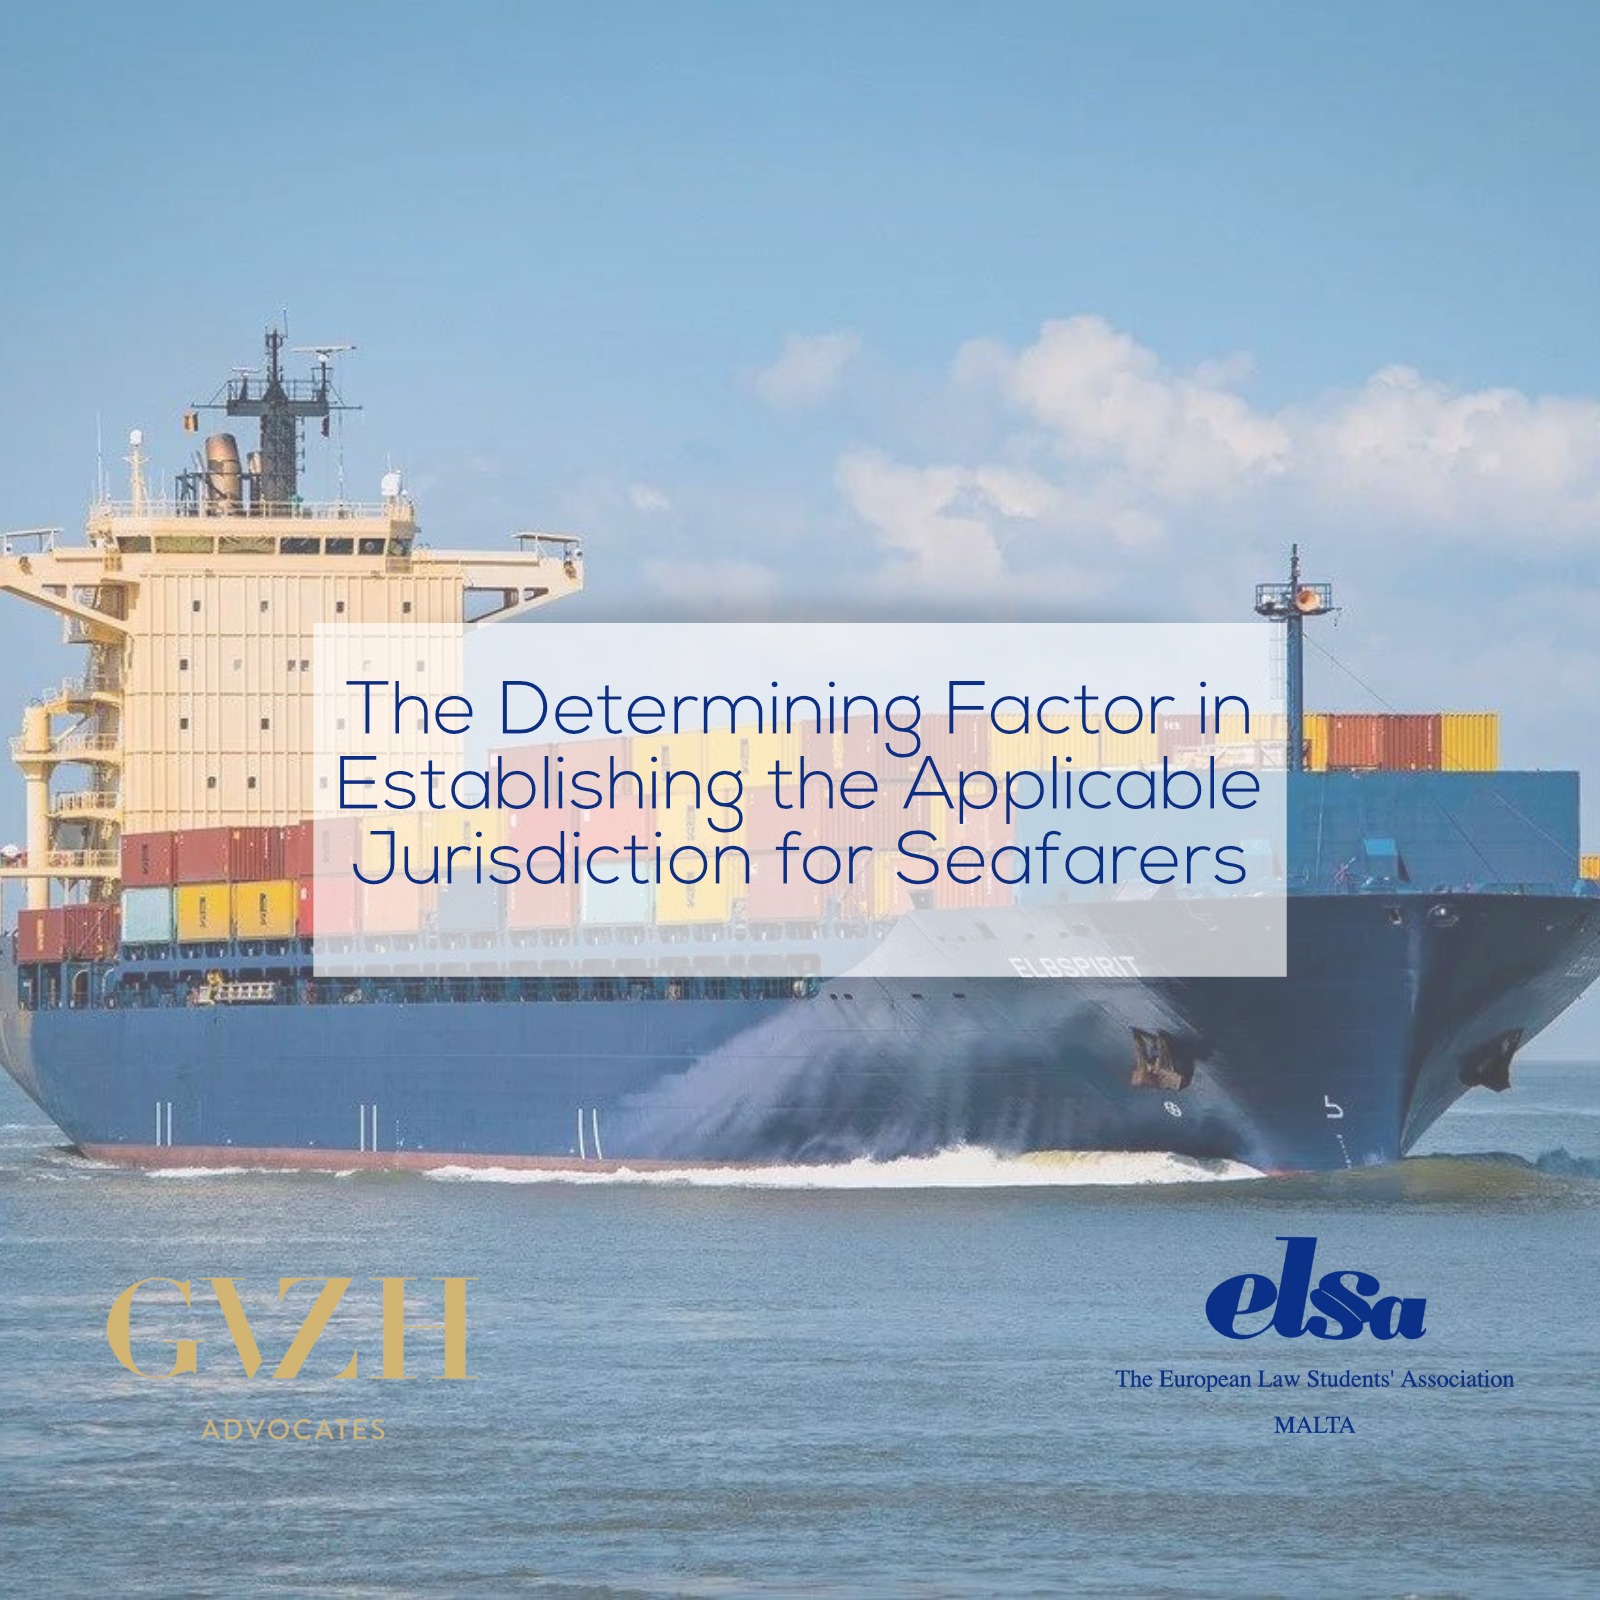 The Determining Factor in Establishing the Applicable Jurisdiction for Seafarers